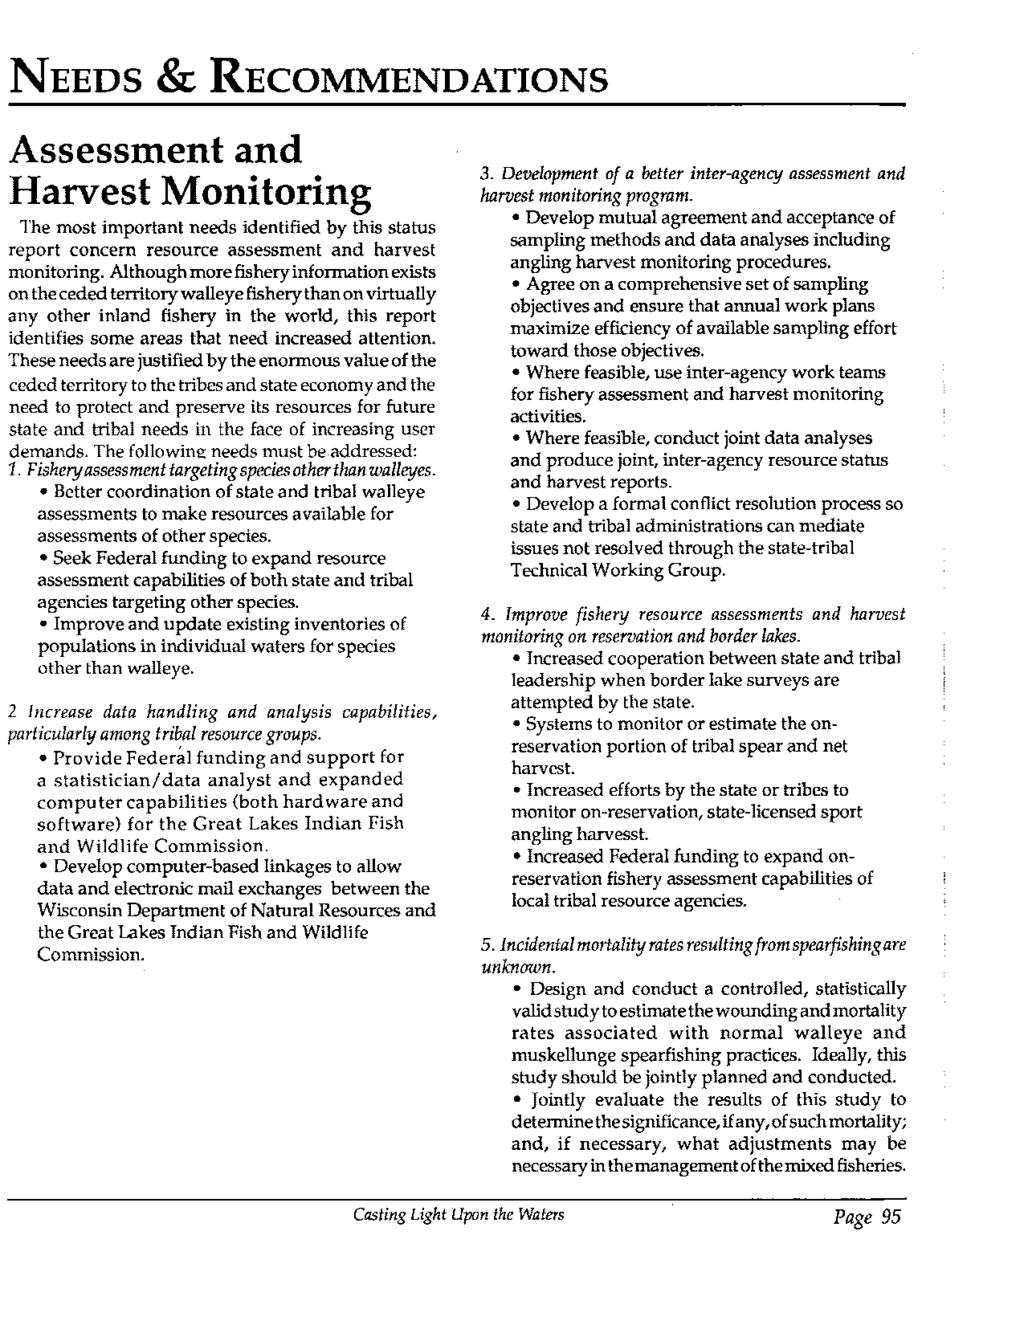 NEEDS & RECOMMENDATIONS Assessment and Harvest Monitoring The most important needs identified by this status report concern resource assessment and harvest monitoring.